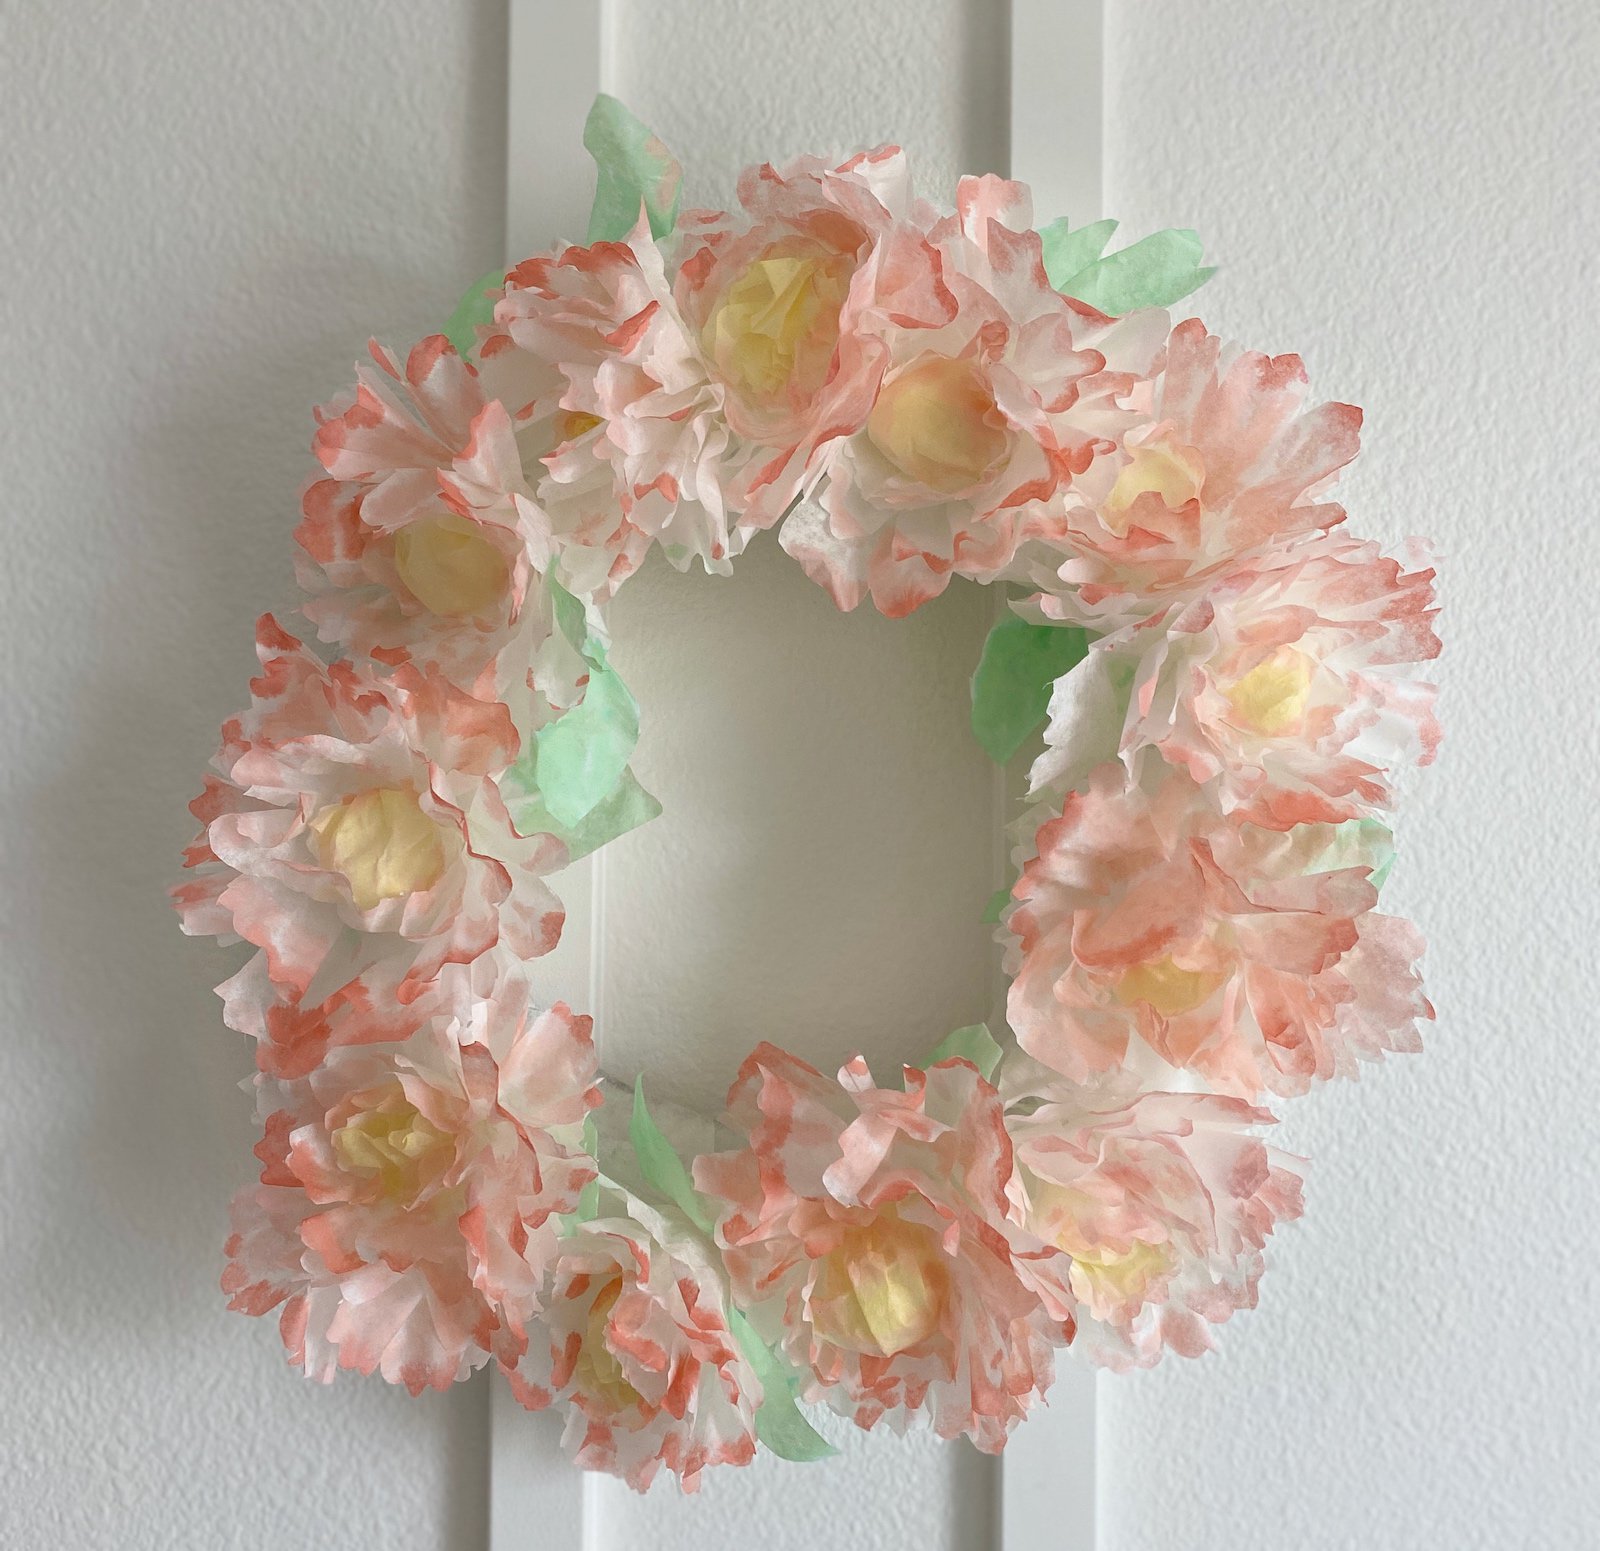 How To Make Coffee Filter Flowers (Easy)